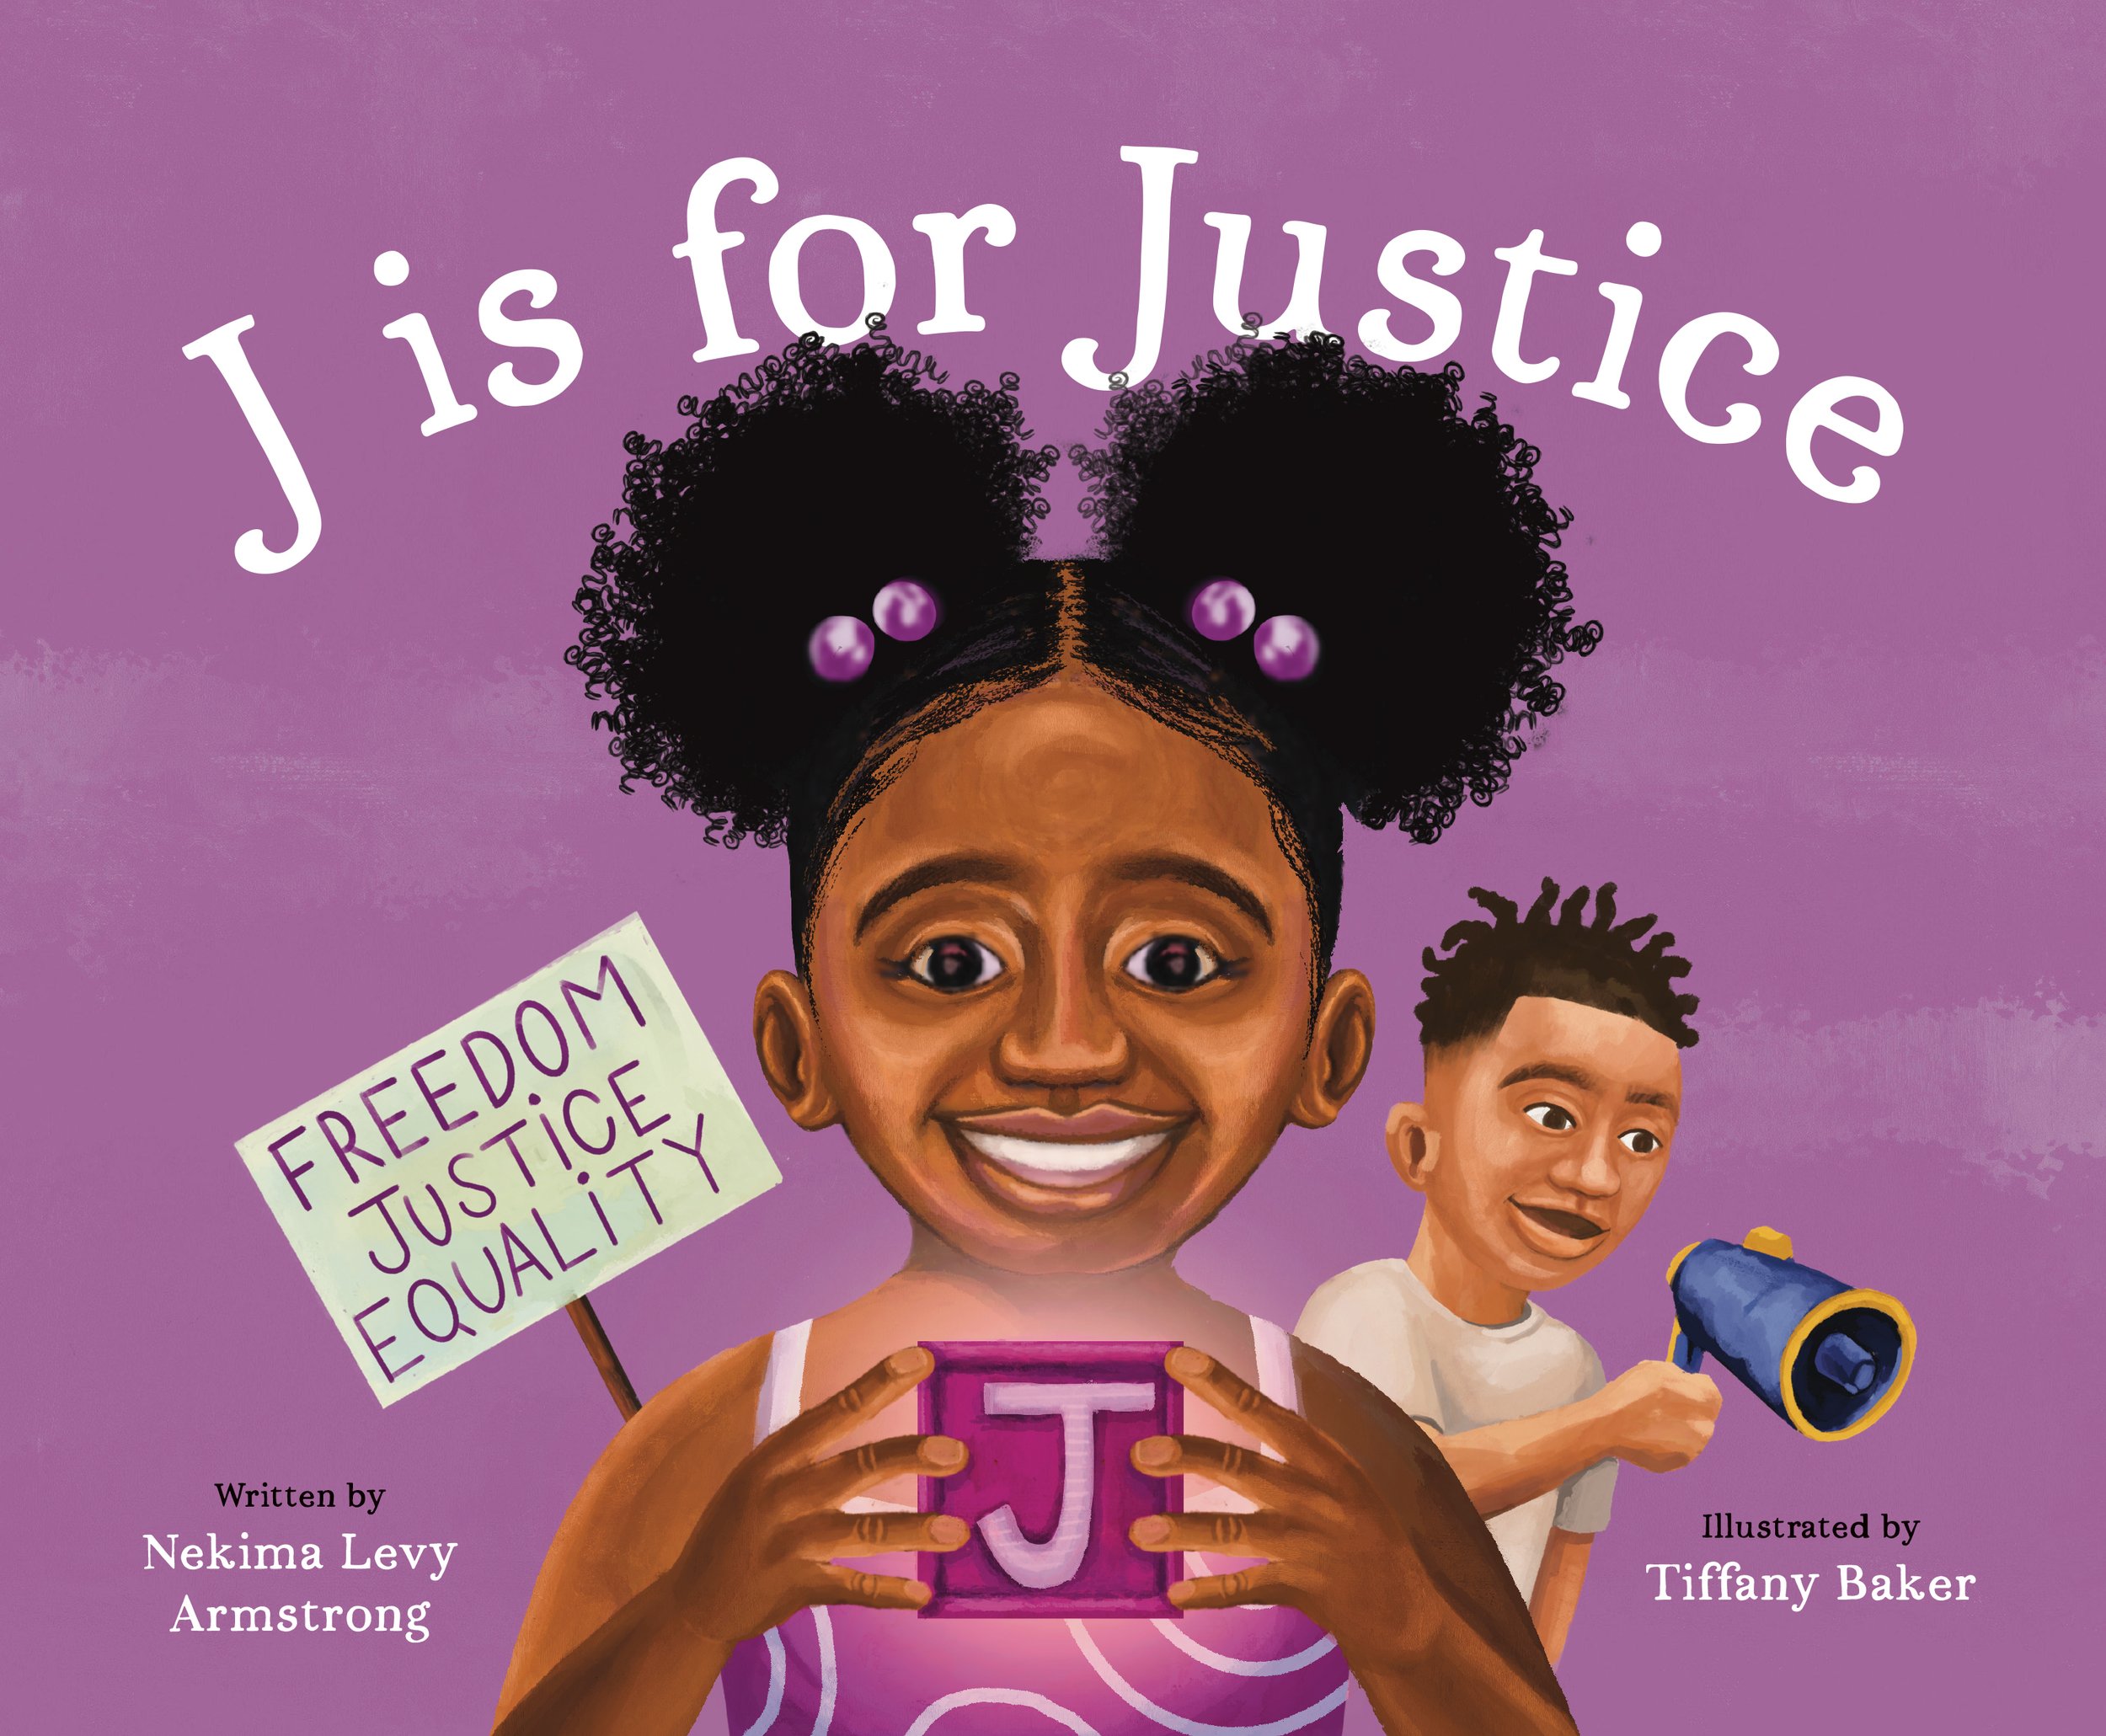 Tiffany Baker Art –Meet Tiffany Baker the artist who created illustrations for  the children's book J is for Justice